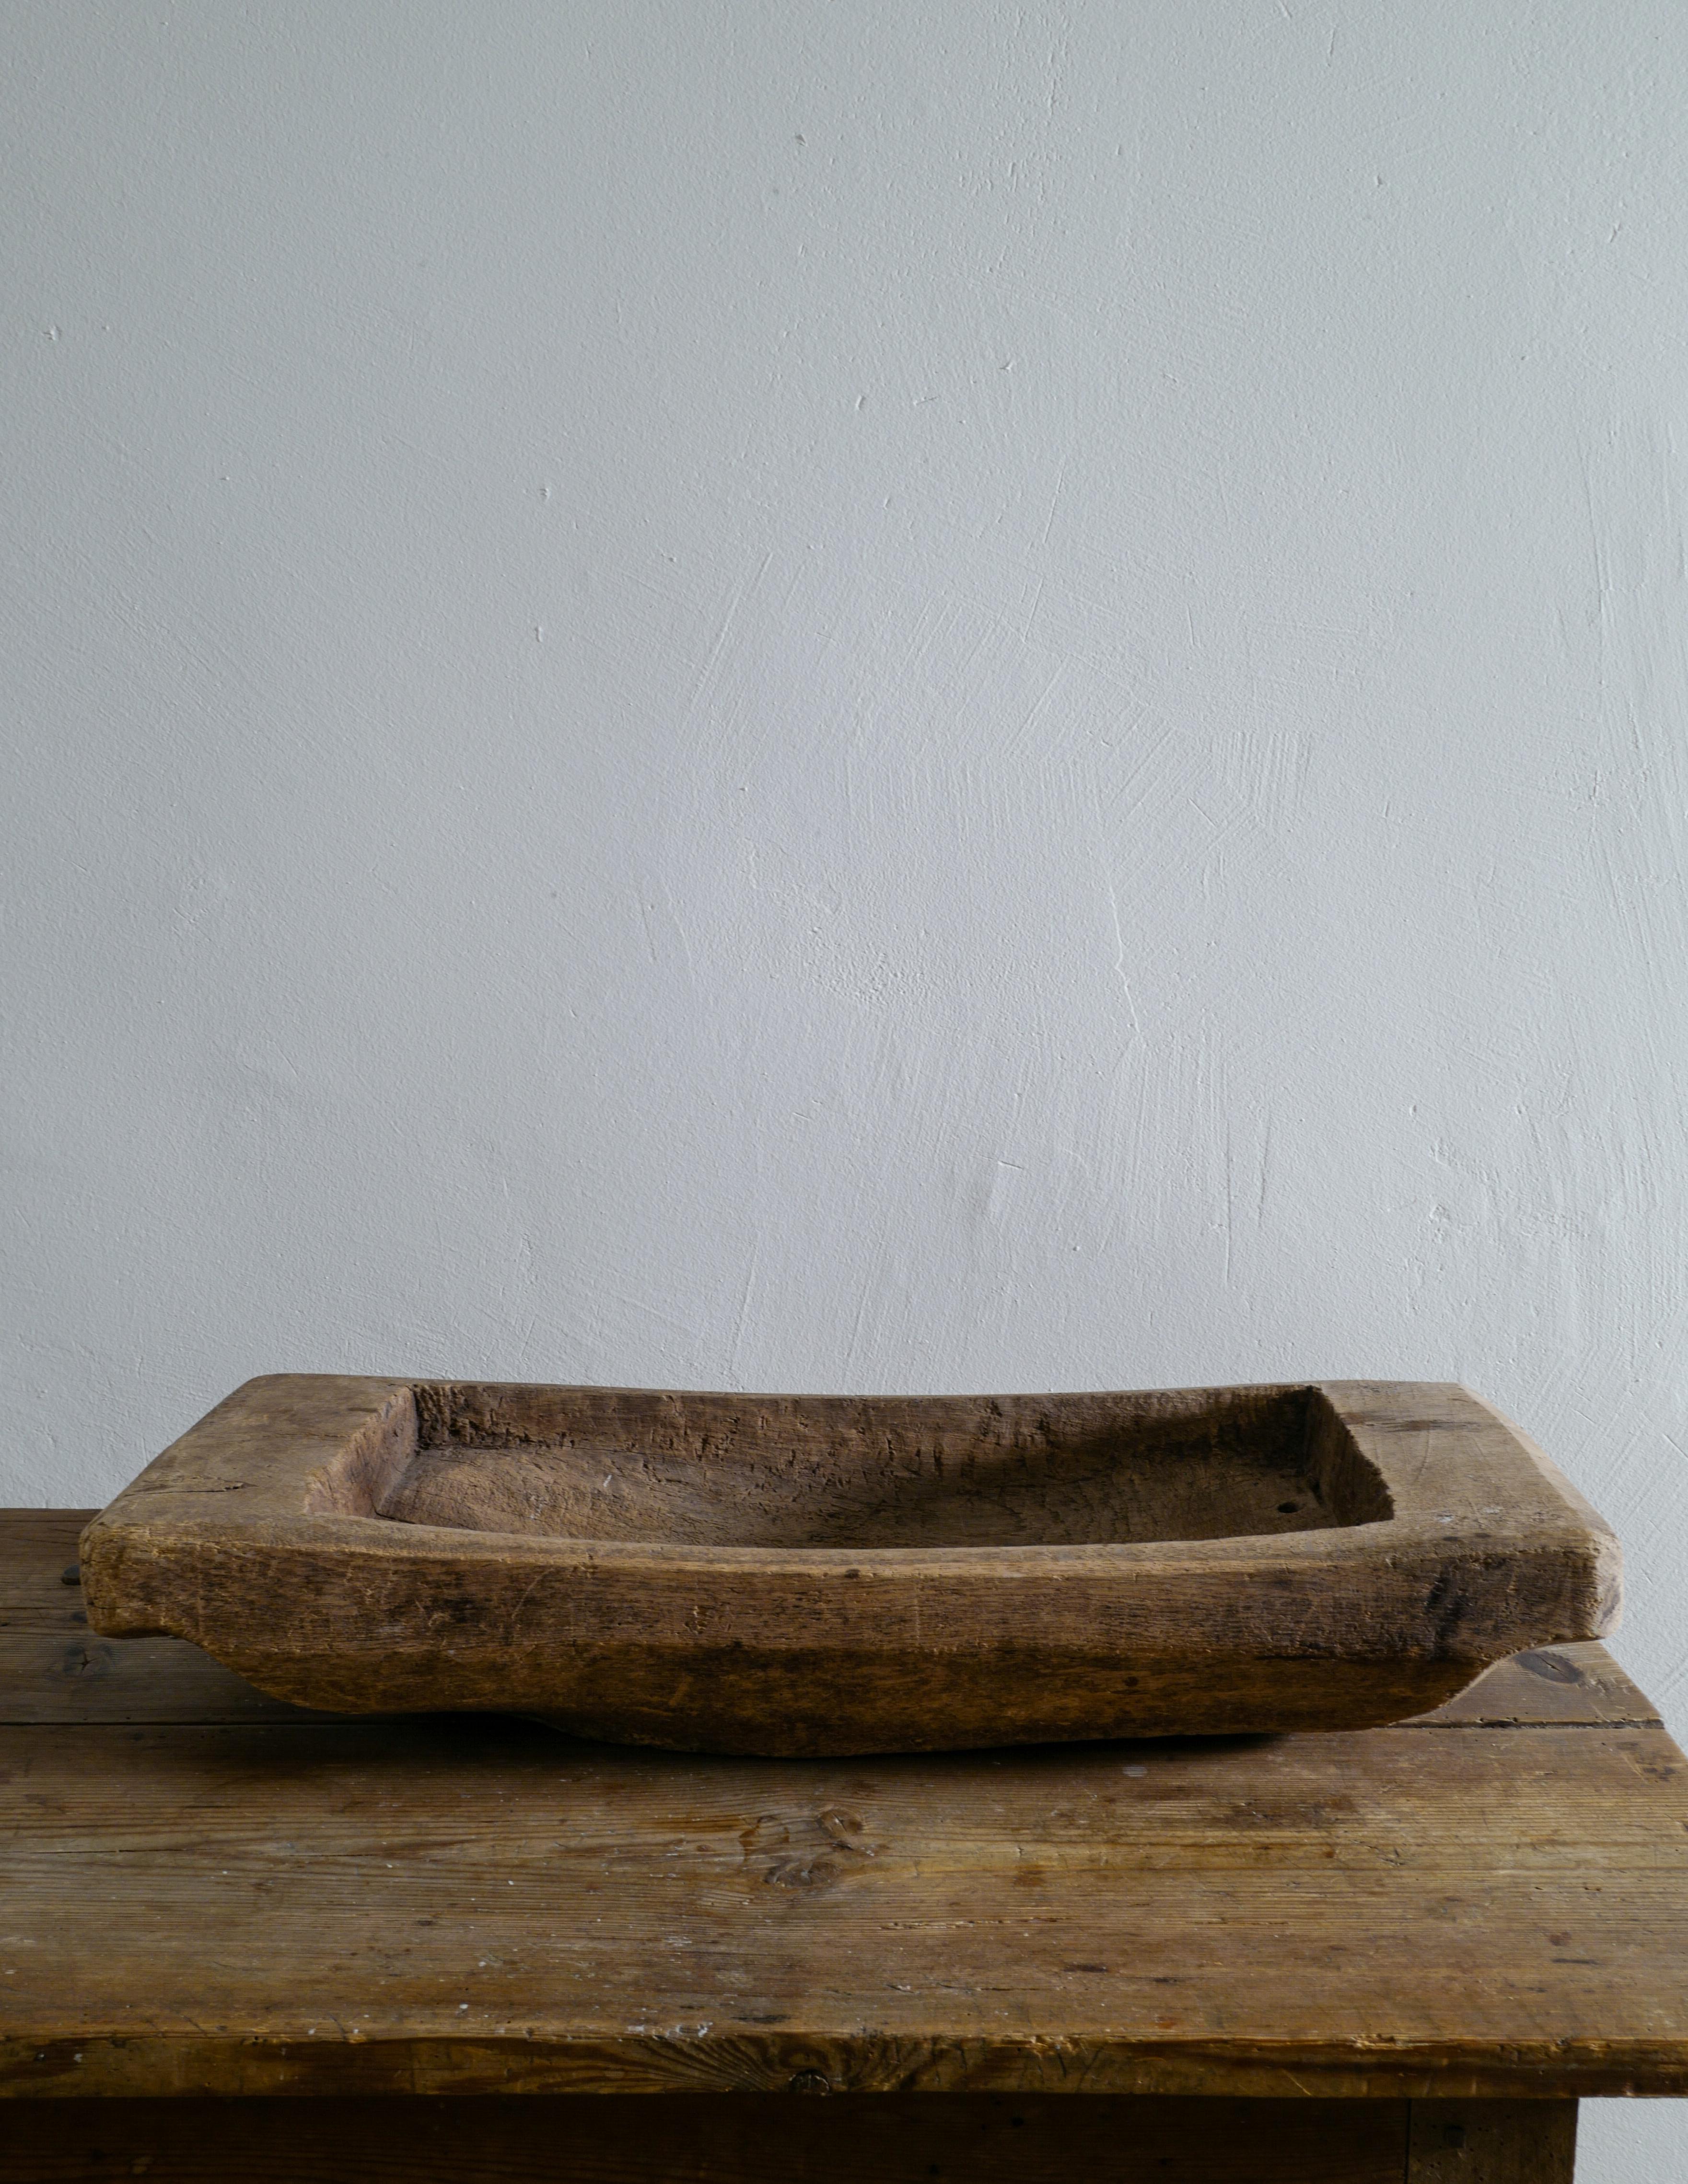 Hand-Carved Large Swedish Wooden Tray in a Brutalist Style of Solid Oak Produced, Late 1800s